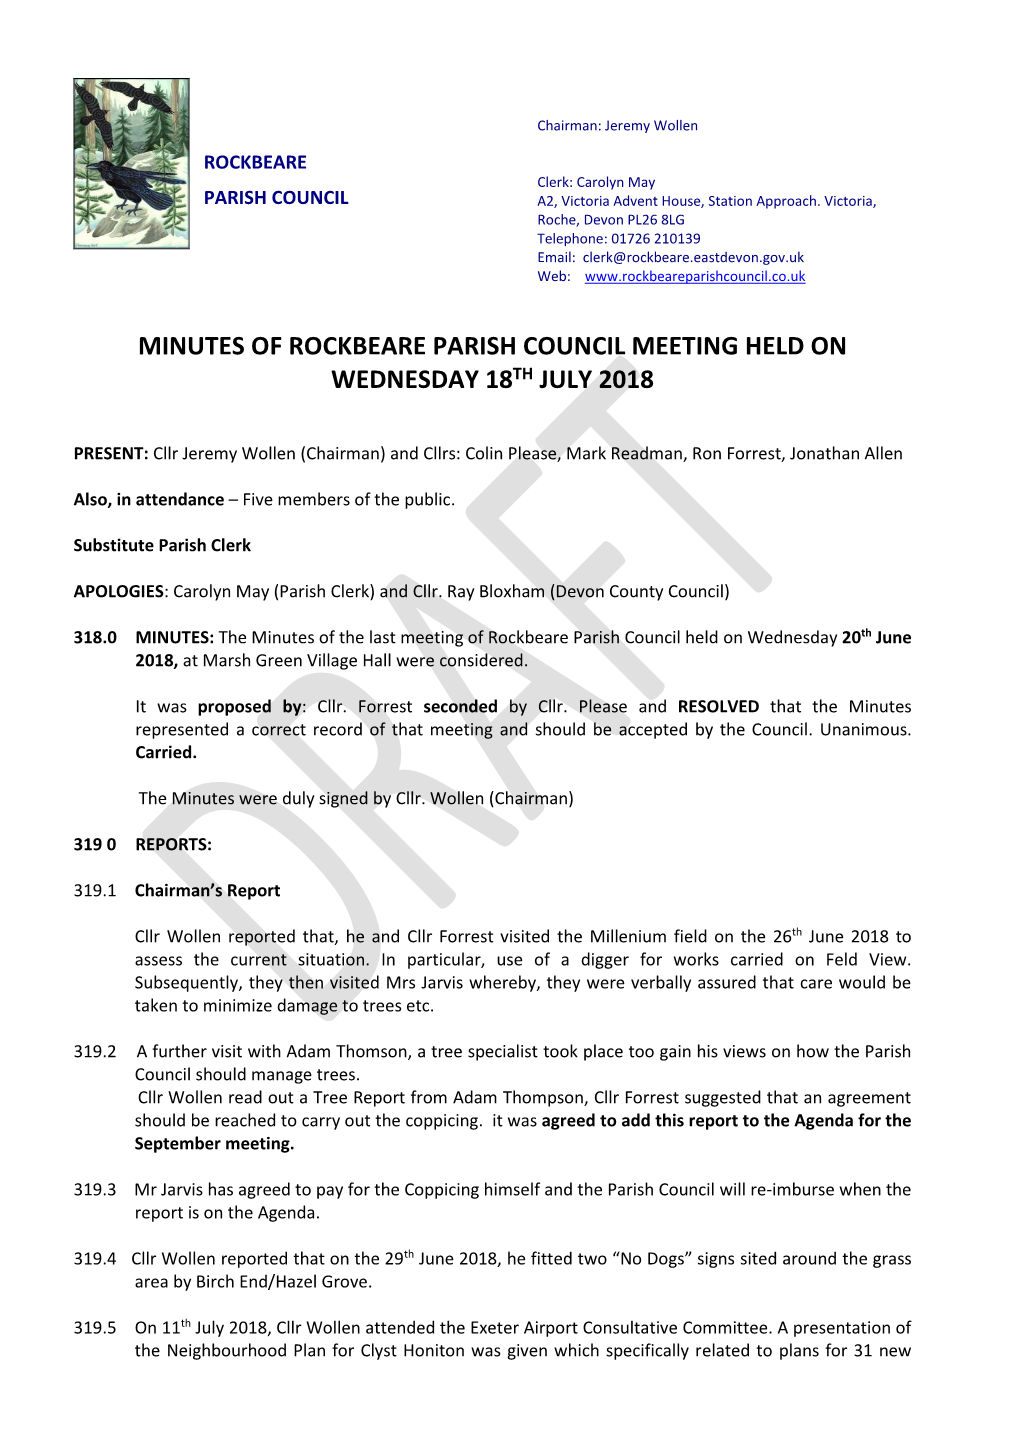 Minutes of Rockbeare Parish Council Meeting Held on Wednesday 18Th July 2018